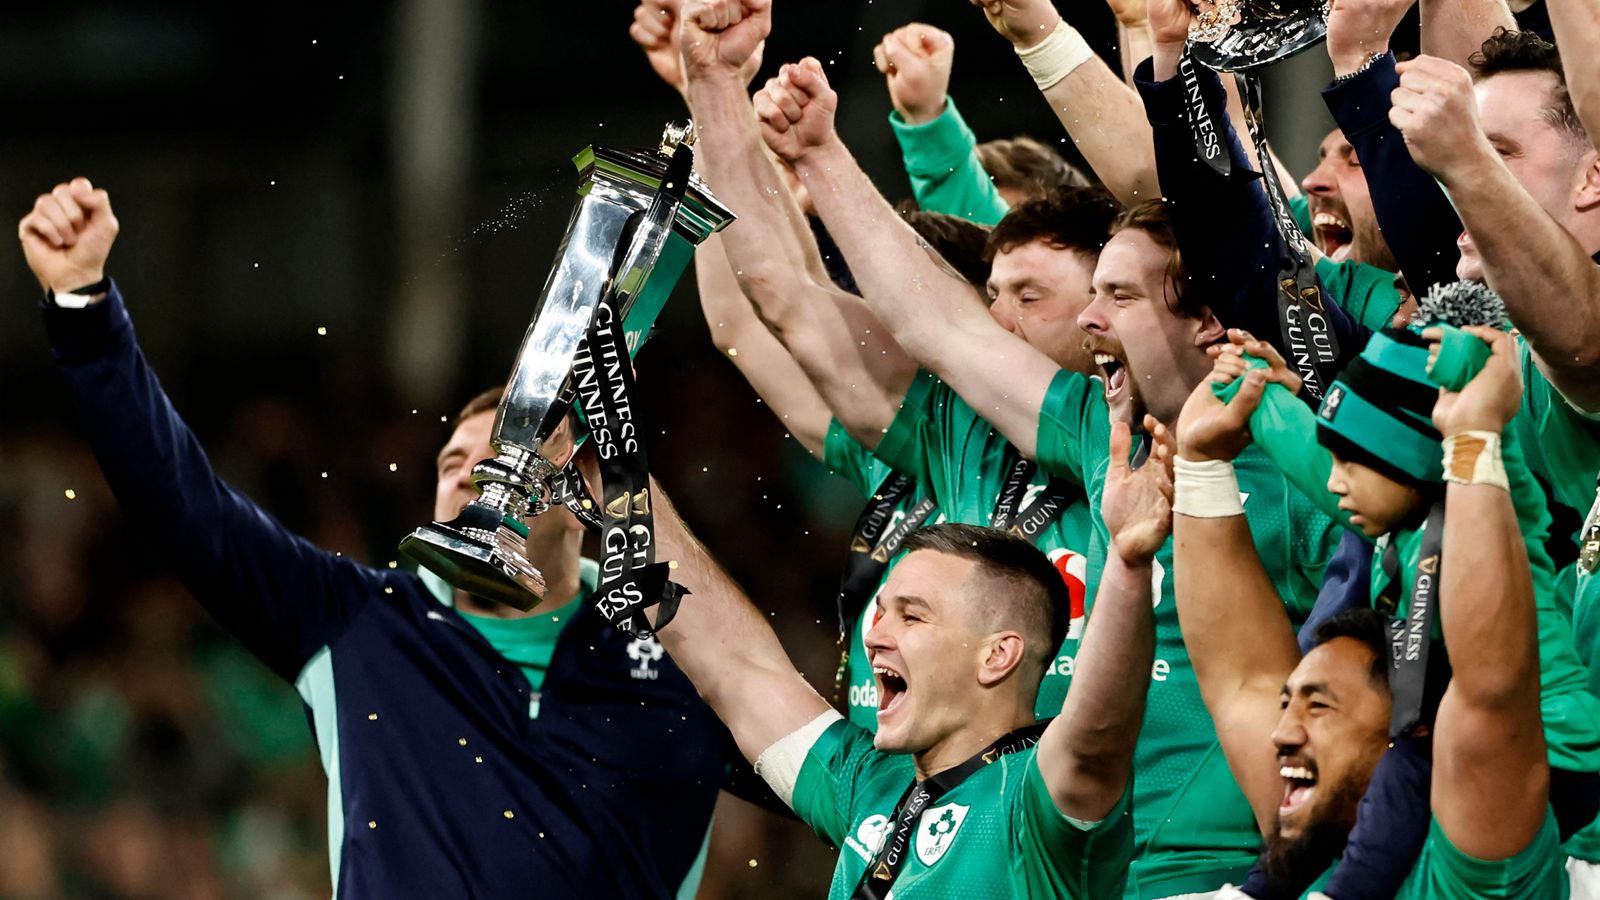 Ireland clinches Six Nations Grand Slam with victory over England - Sky Sports (Picture 1)